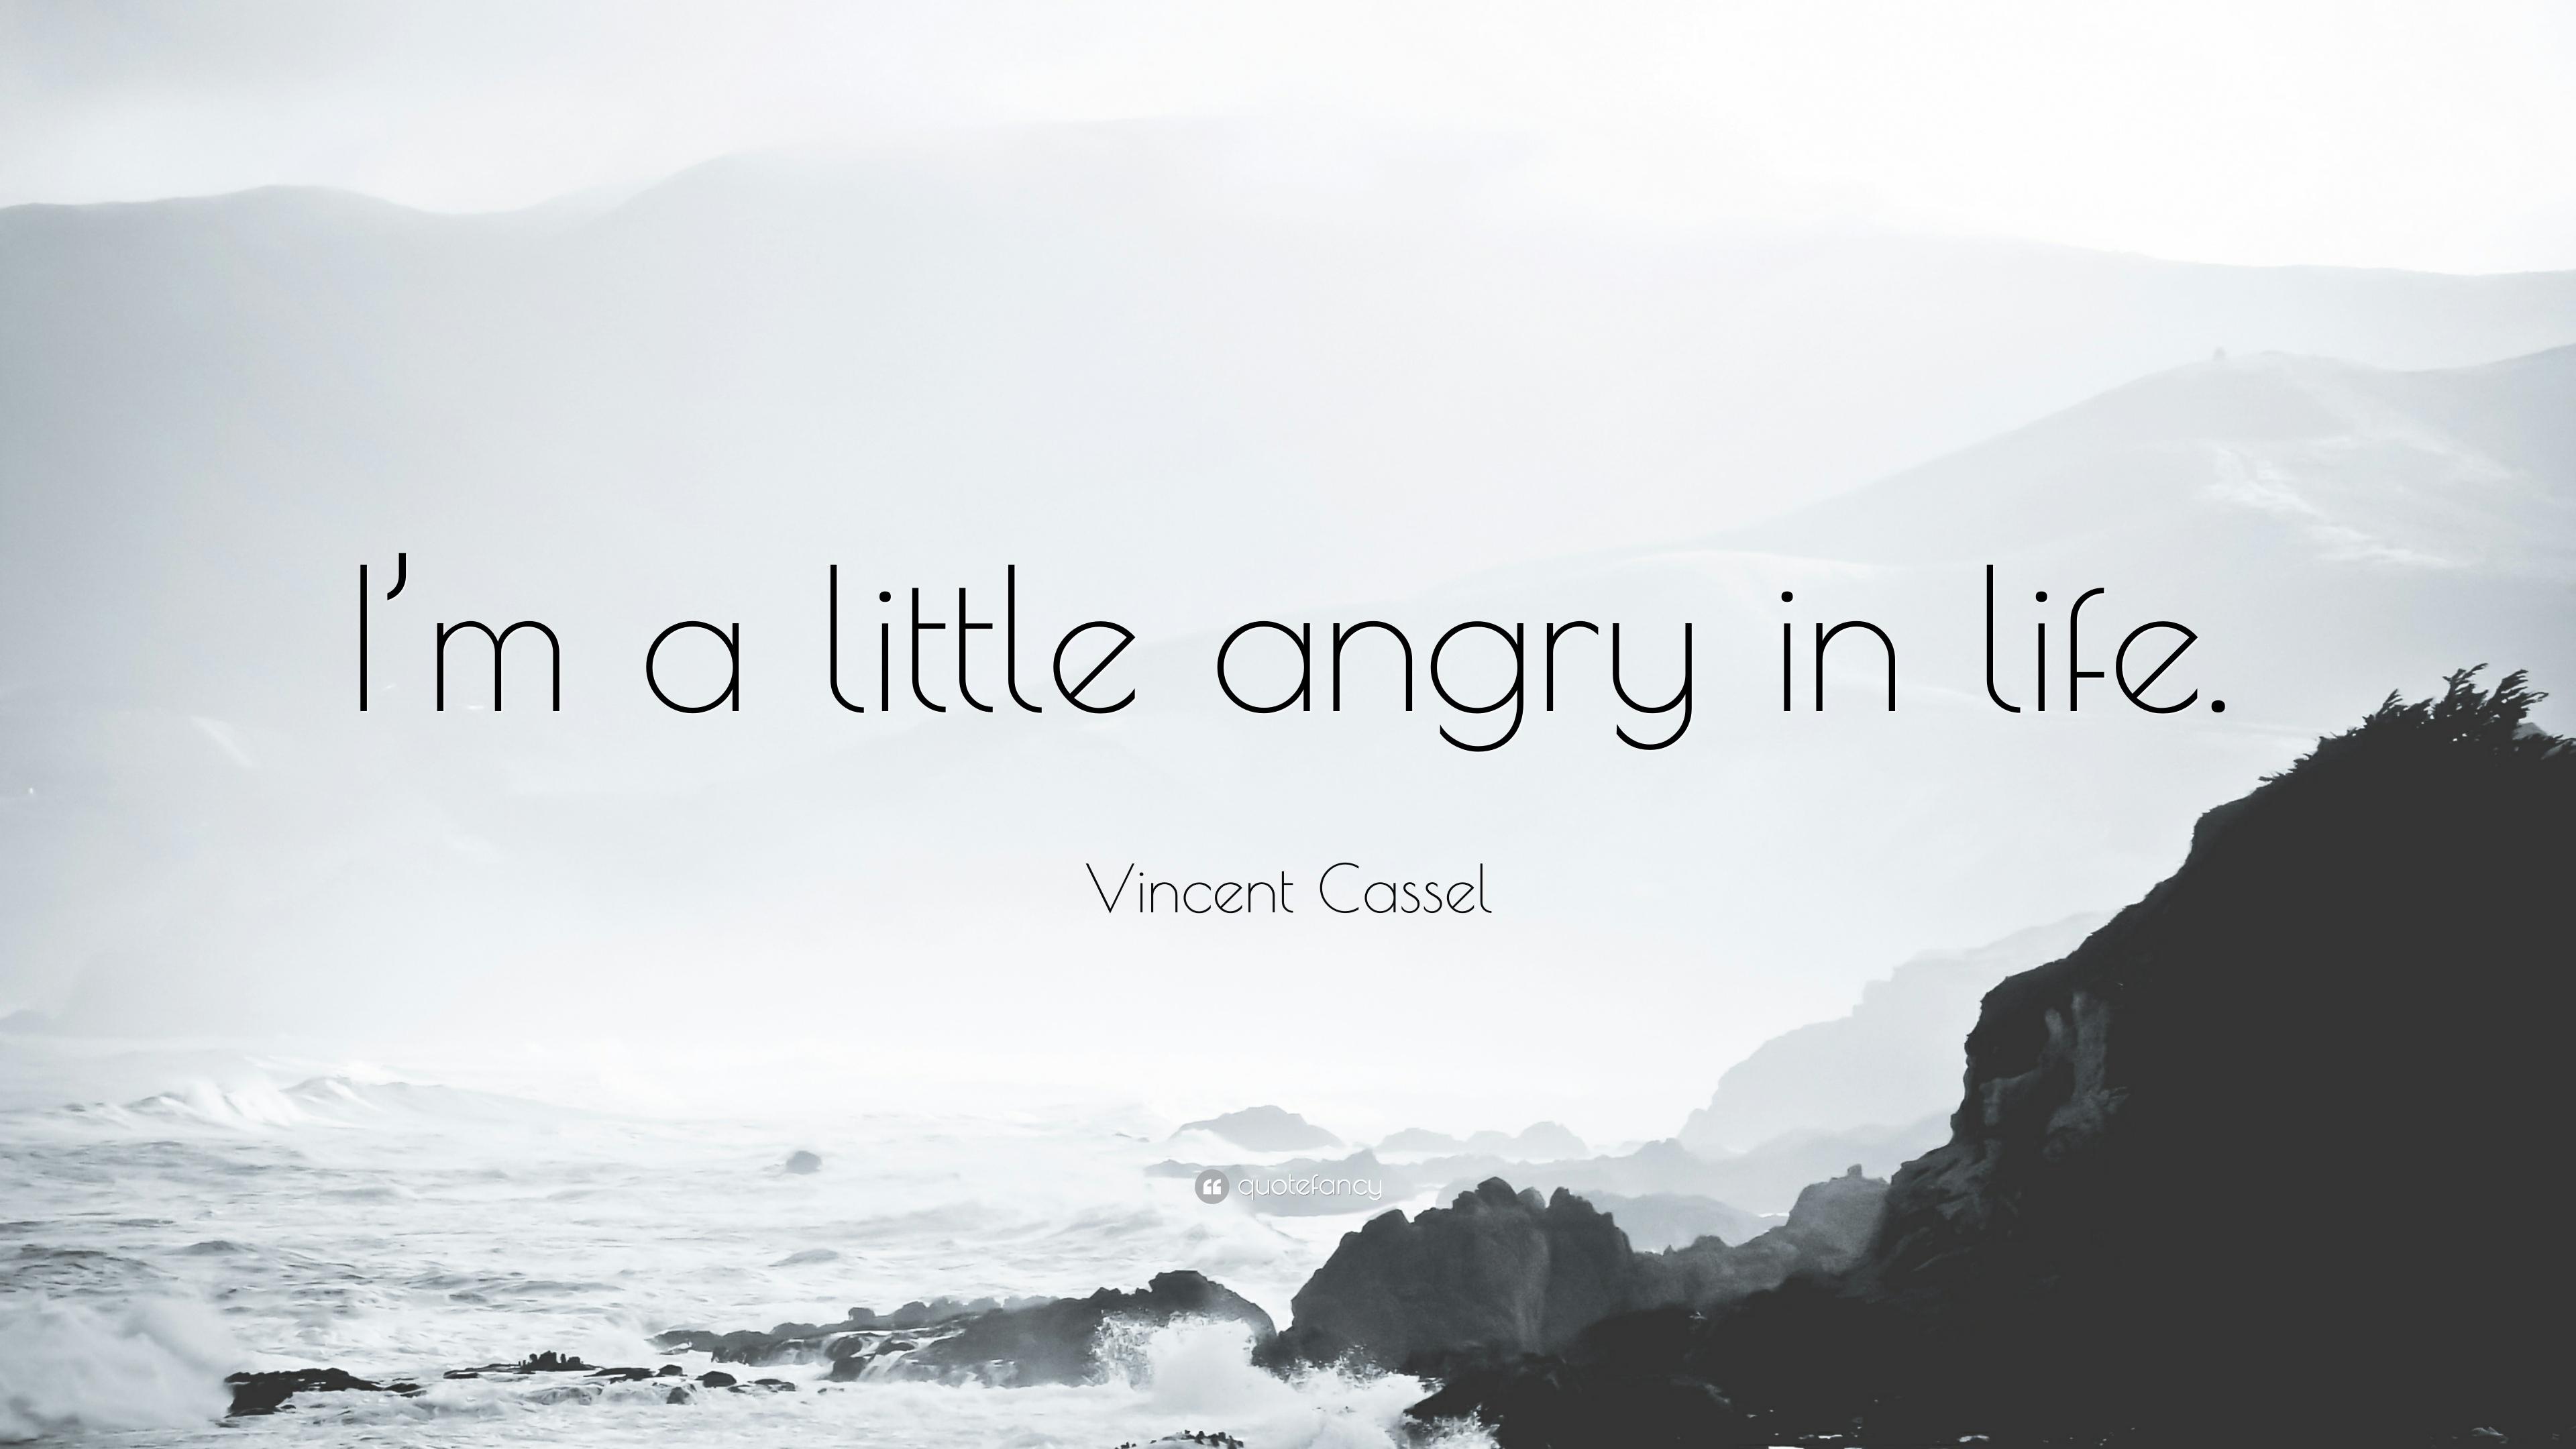 Vincent Cassel Quote: “I'm a little angry in life.” 7 wallpaper